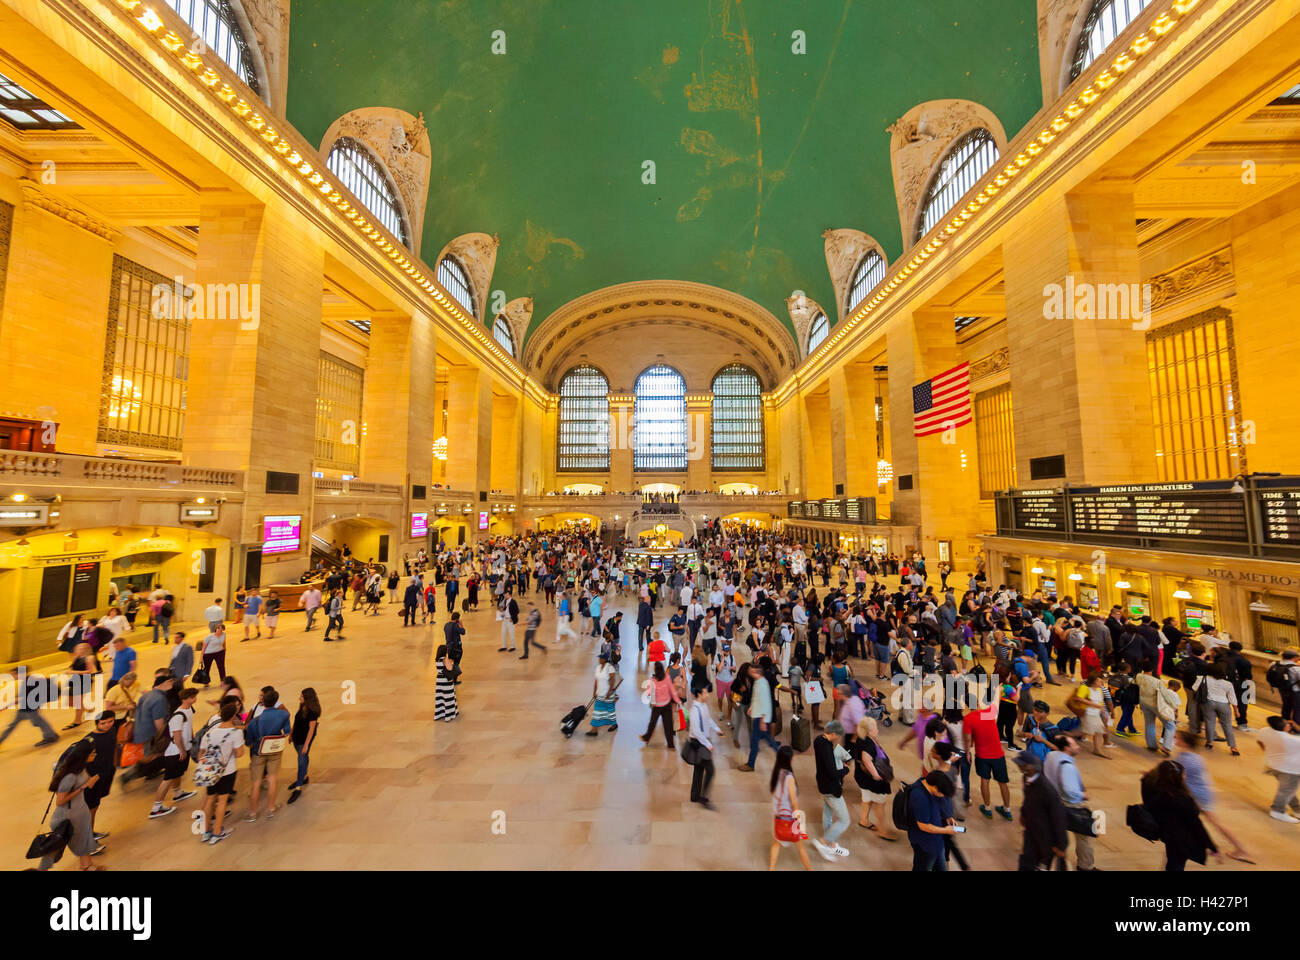 An interior view of Grand Central Station in New York City with all the travelers. Stock Photo